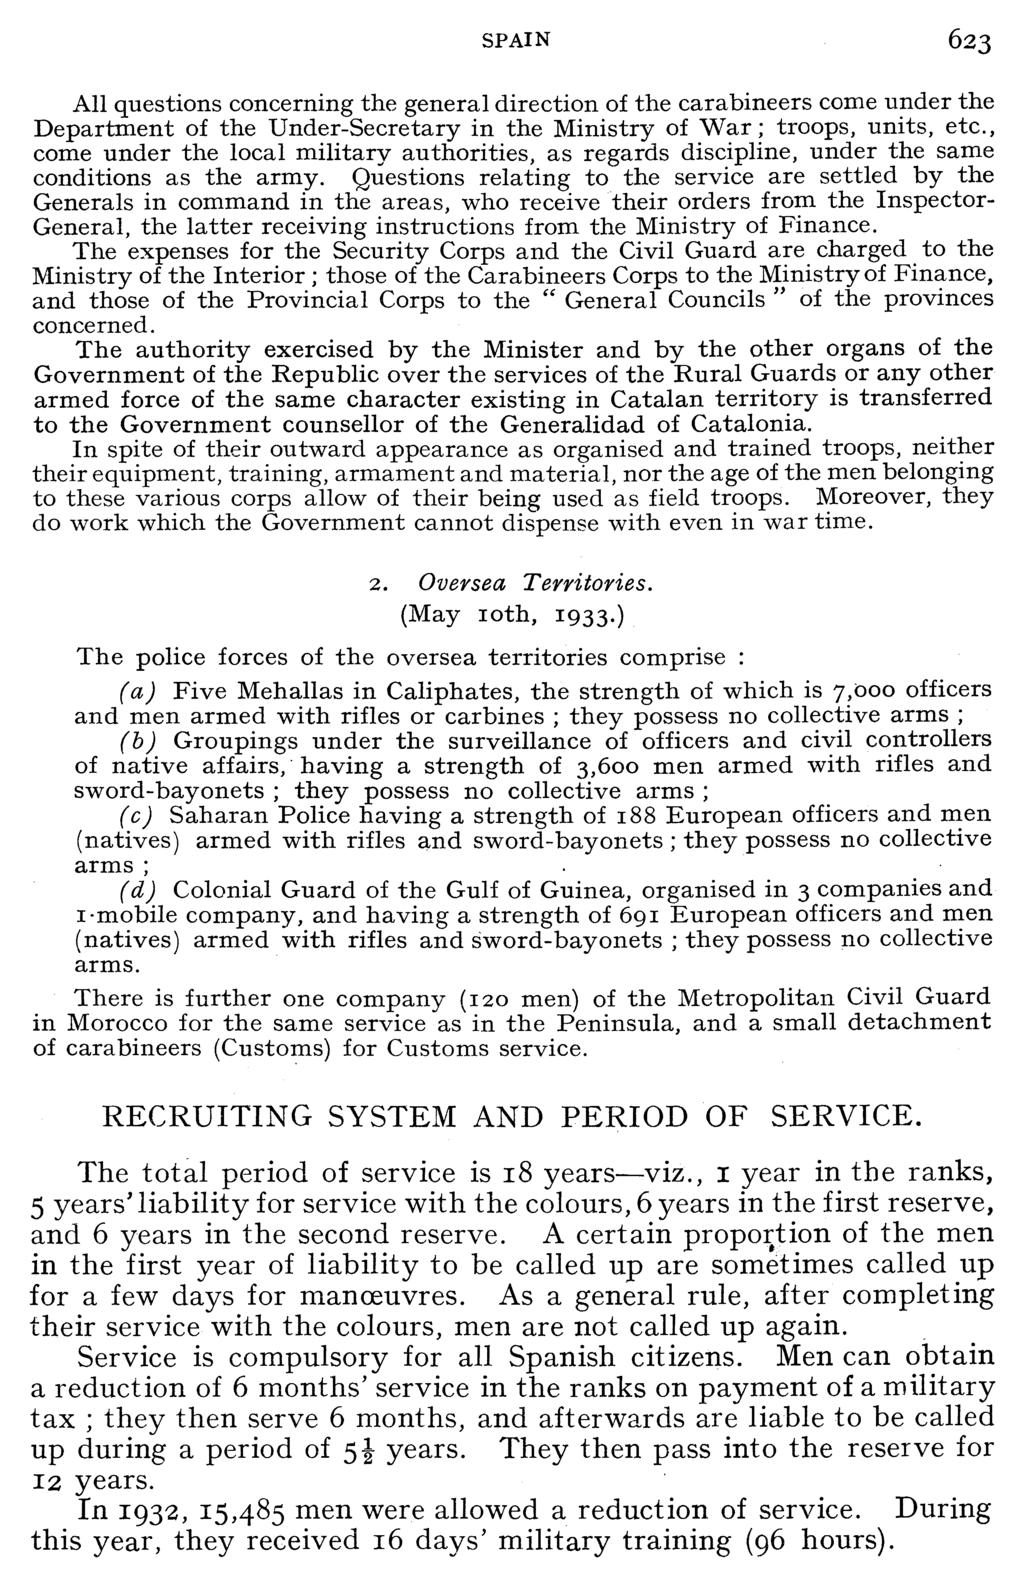 SPAIN 623 All questions concerning the general direction of the carabineers come under the Department of the Under-Secretary in the Ministry of War; troops, units, etc.